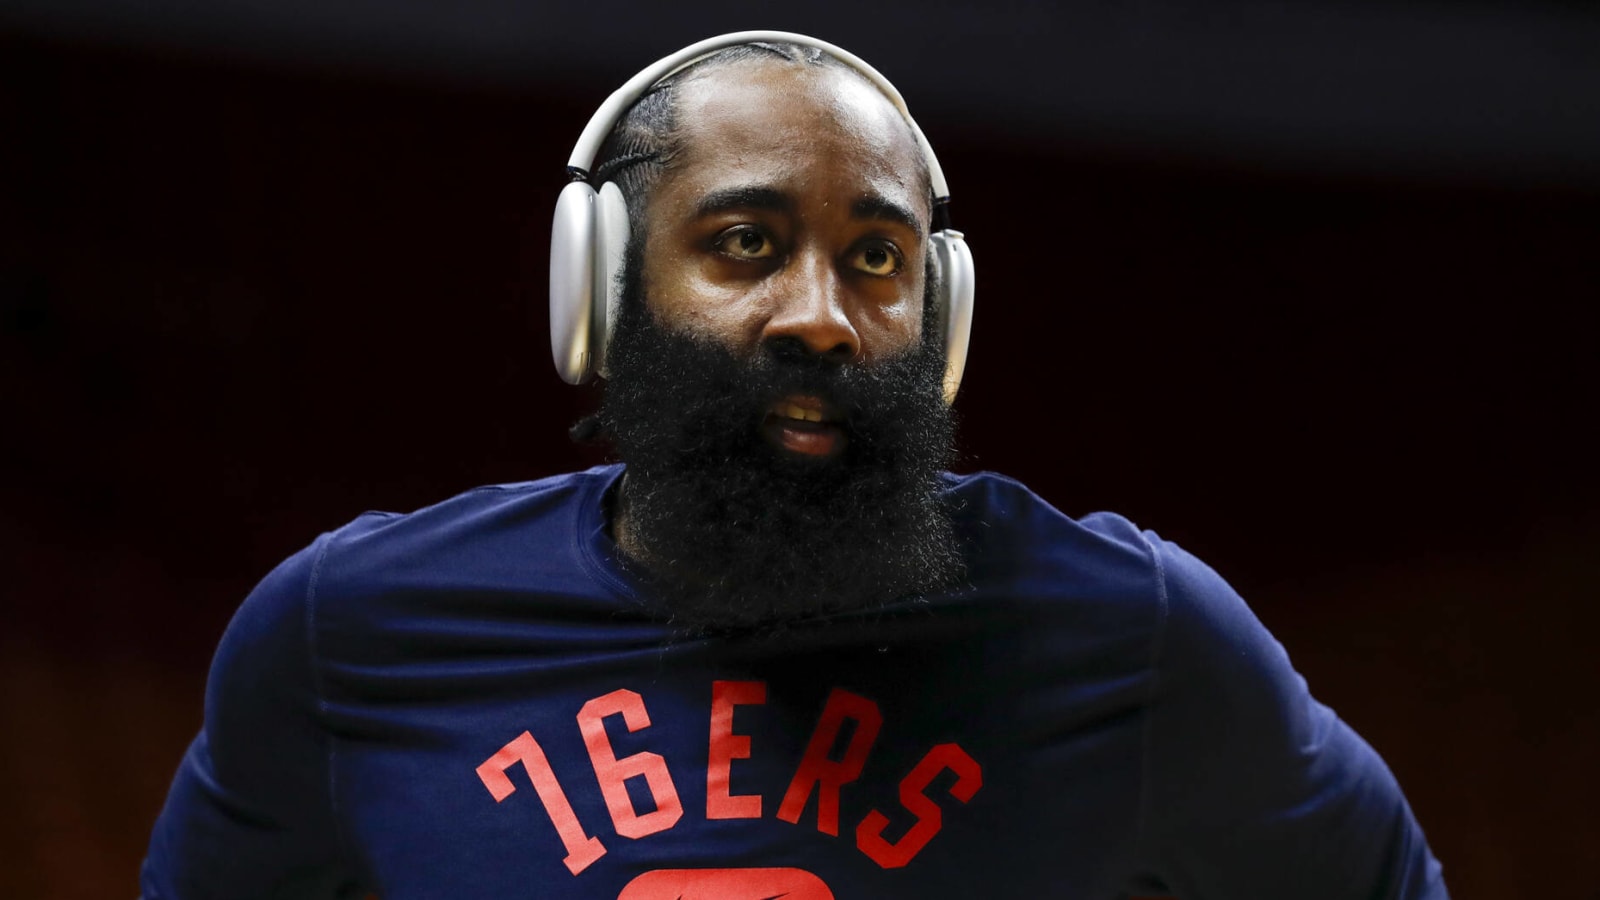 76ers star James Harden will reportedly take massive pay cut